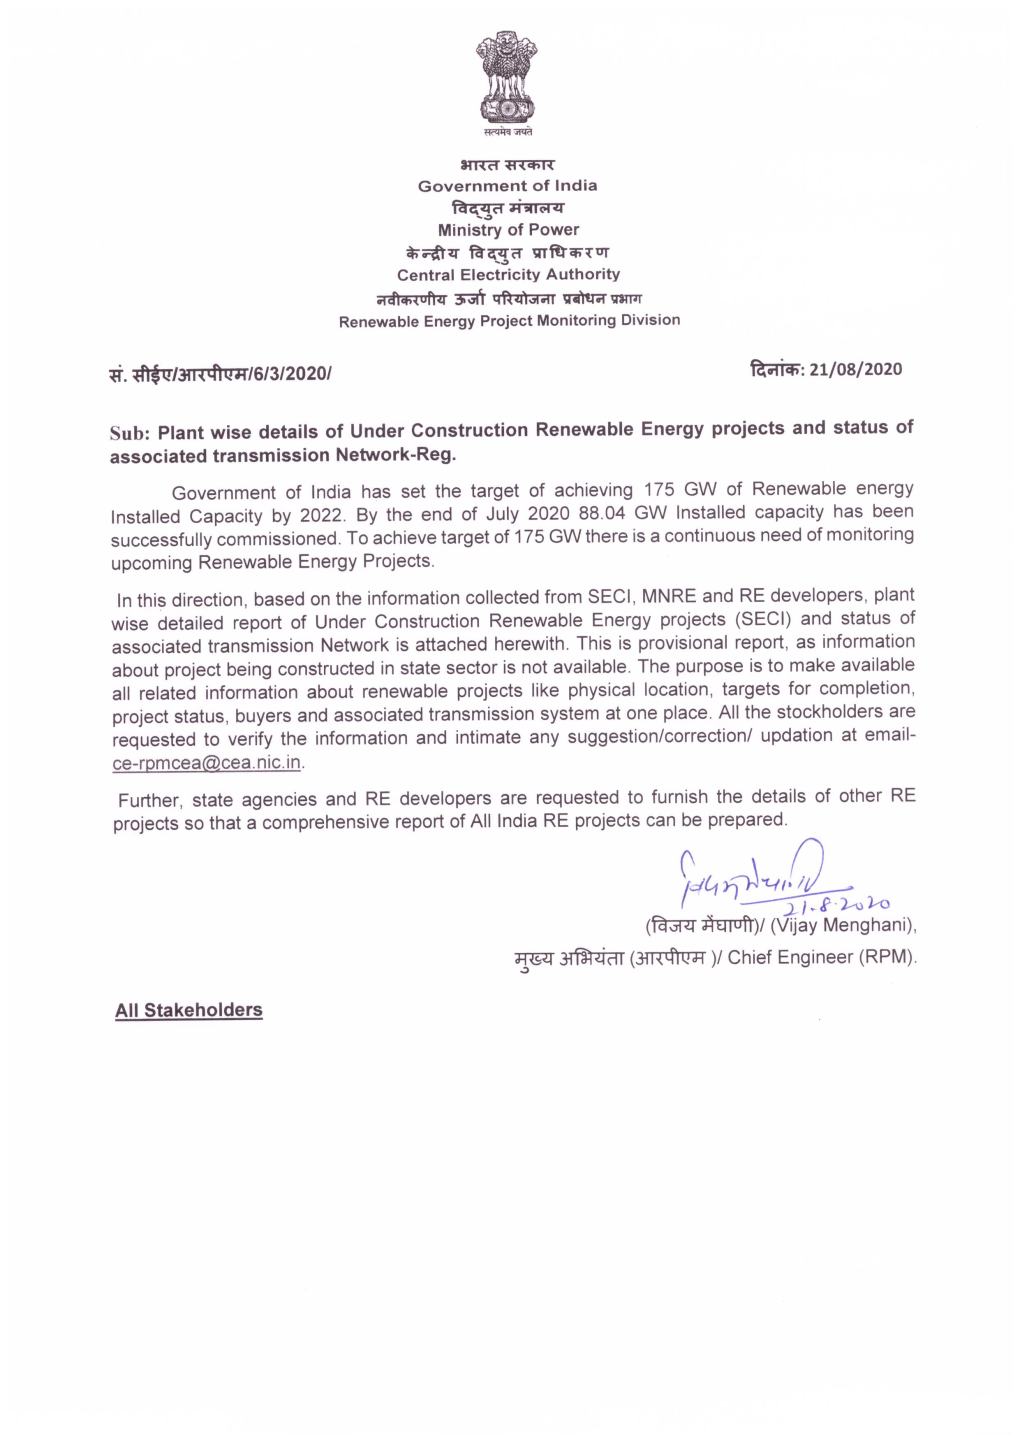 Report of Under Construction Renewable Energy Projects